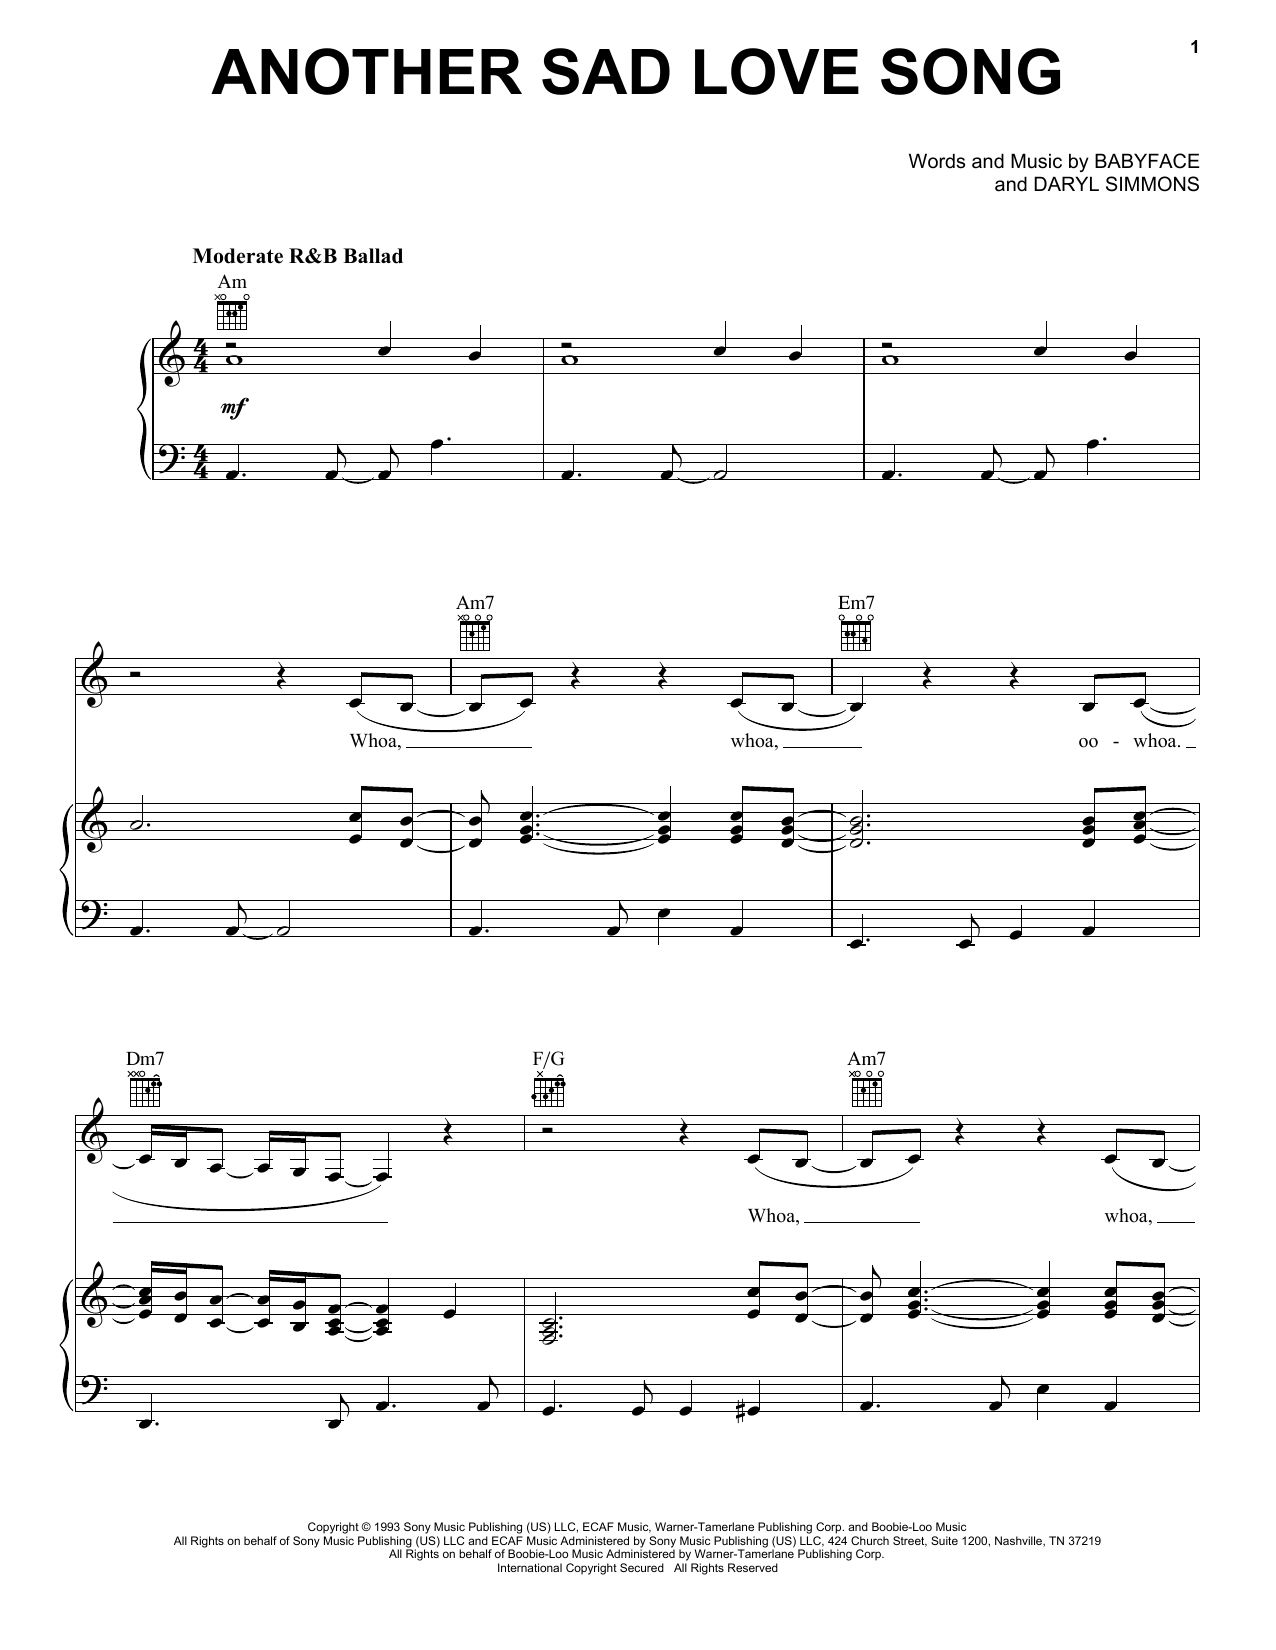 Download Toni Braxton Another Sad Love Song Sheet Music